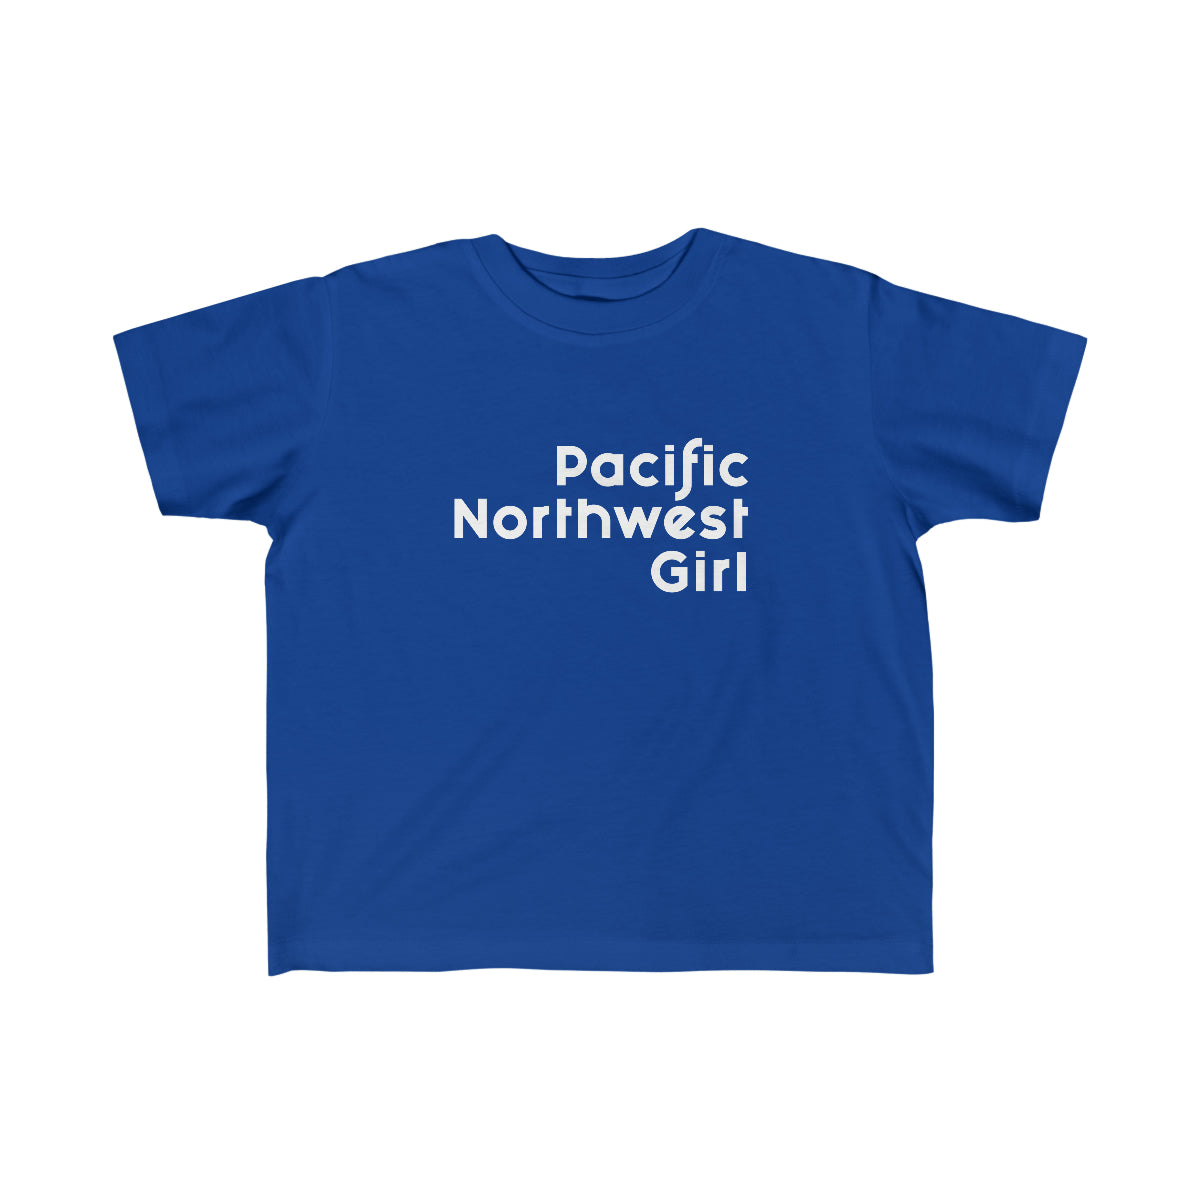 Pacific Northwest Girl Toddler Tee Royal / 2T - The Northwest Store